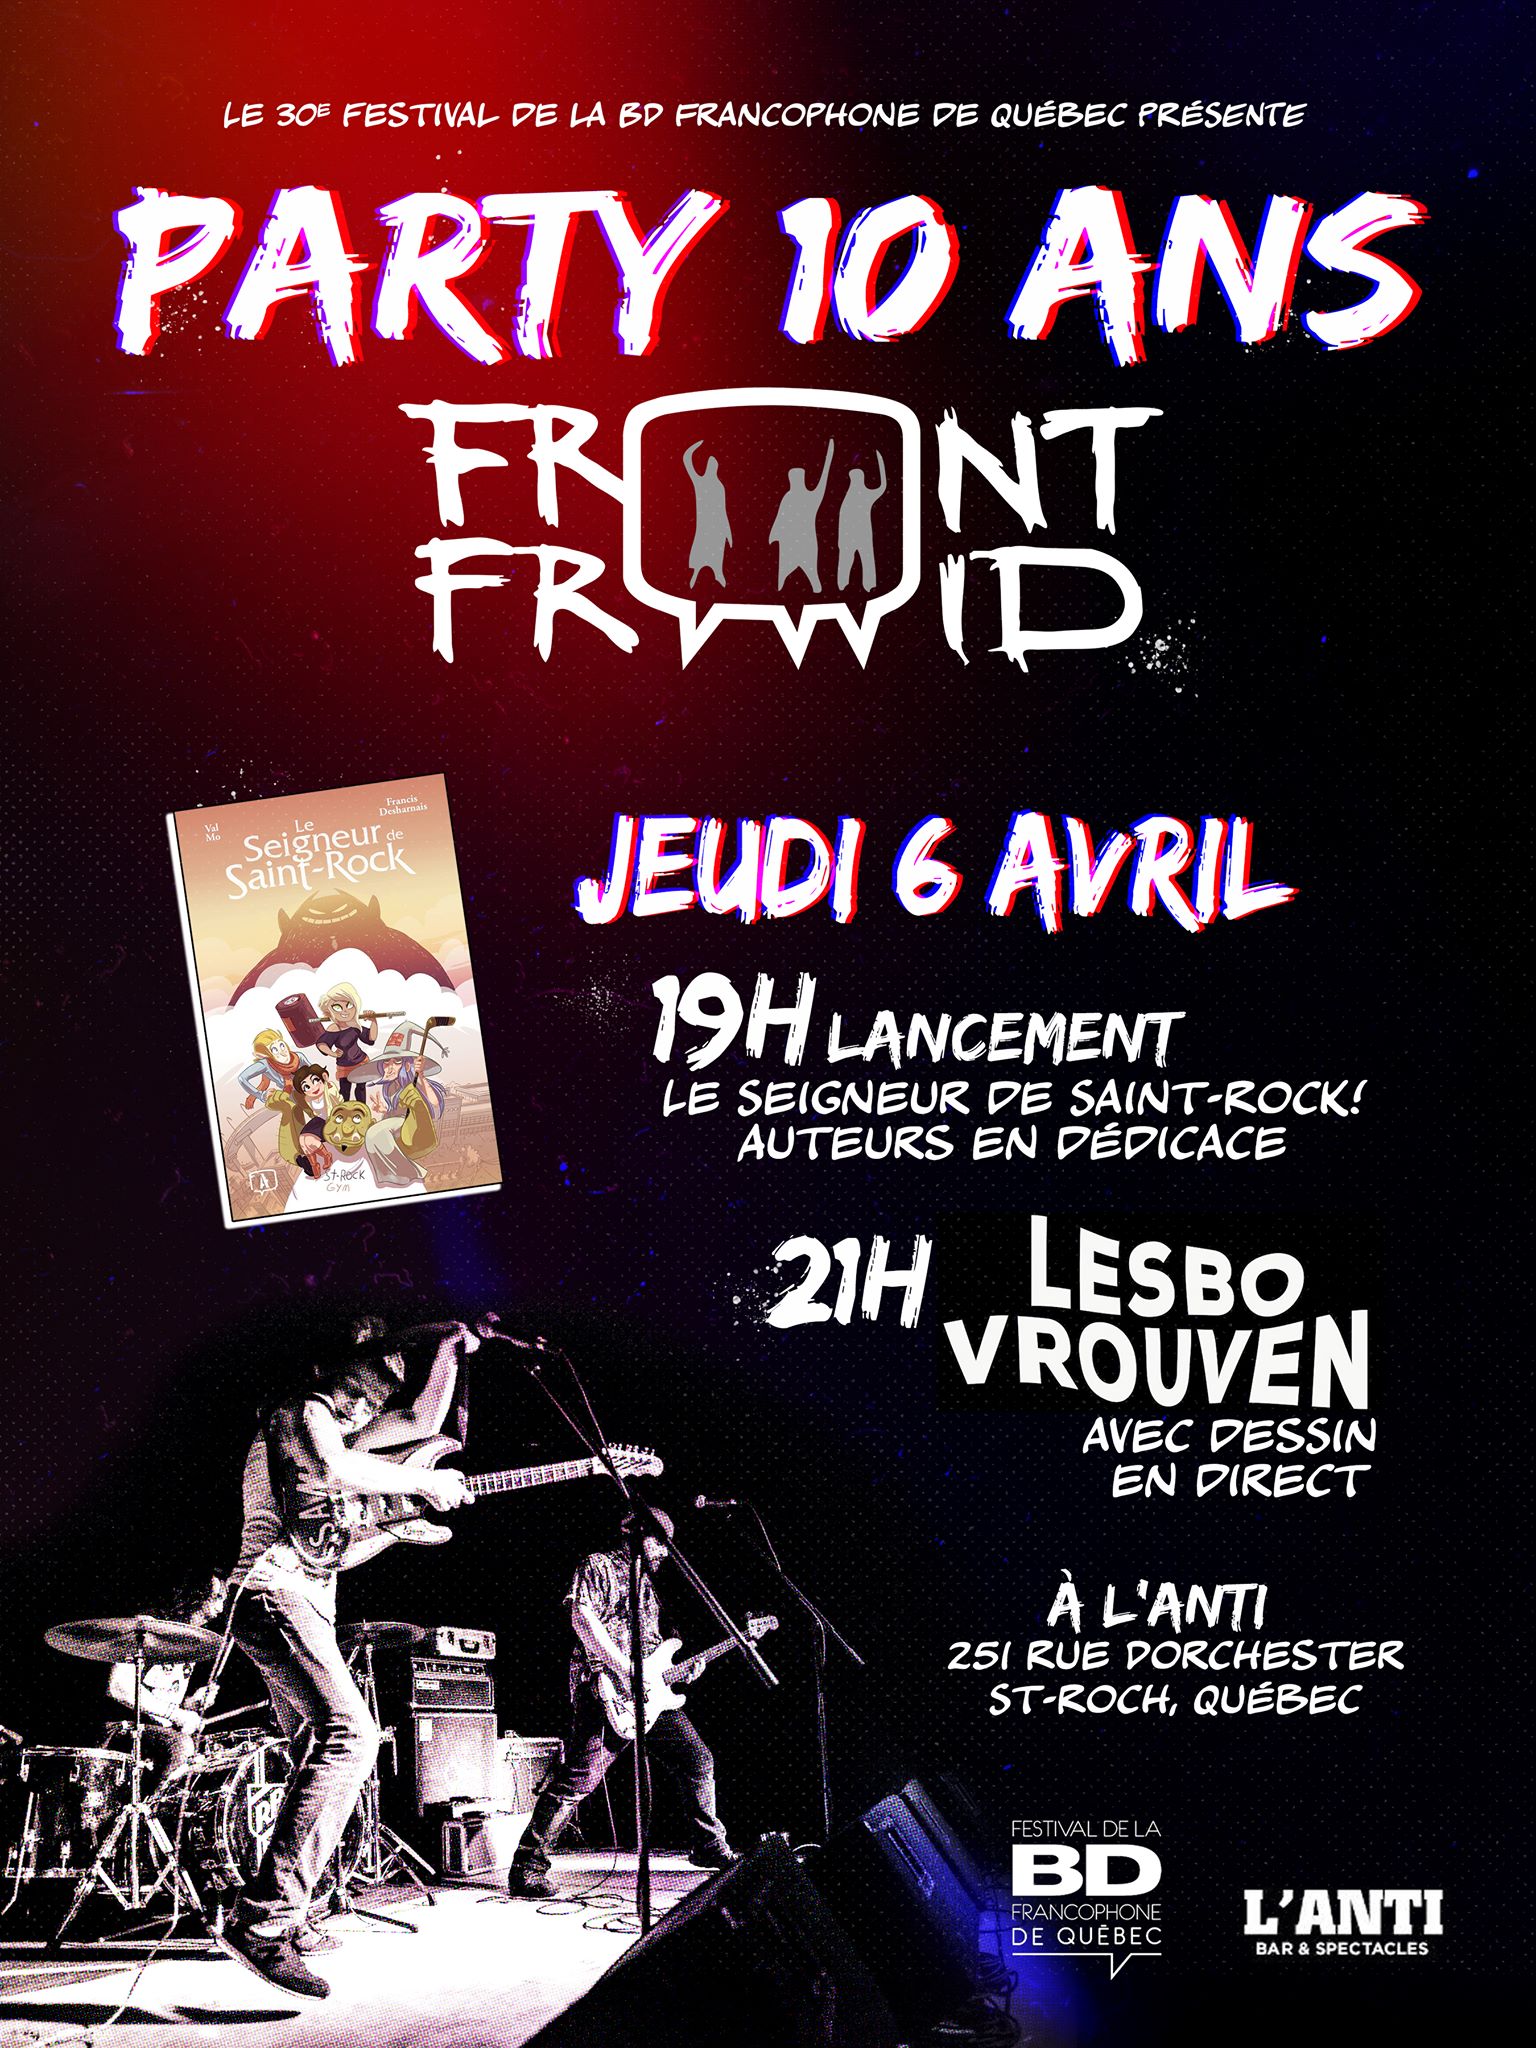 Party 10 ans Front Froid + Lesbo Vrouven